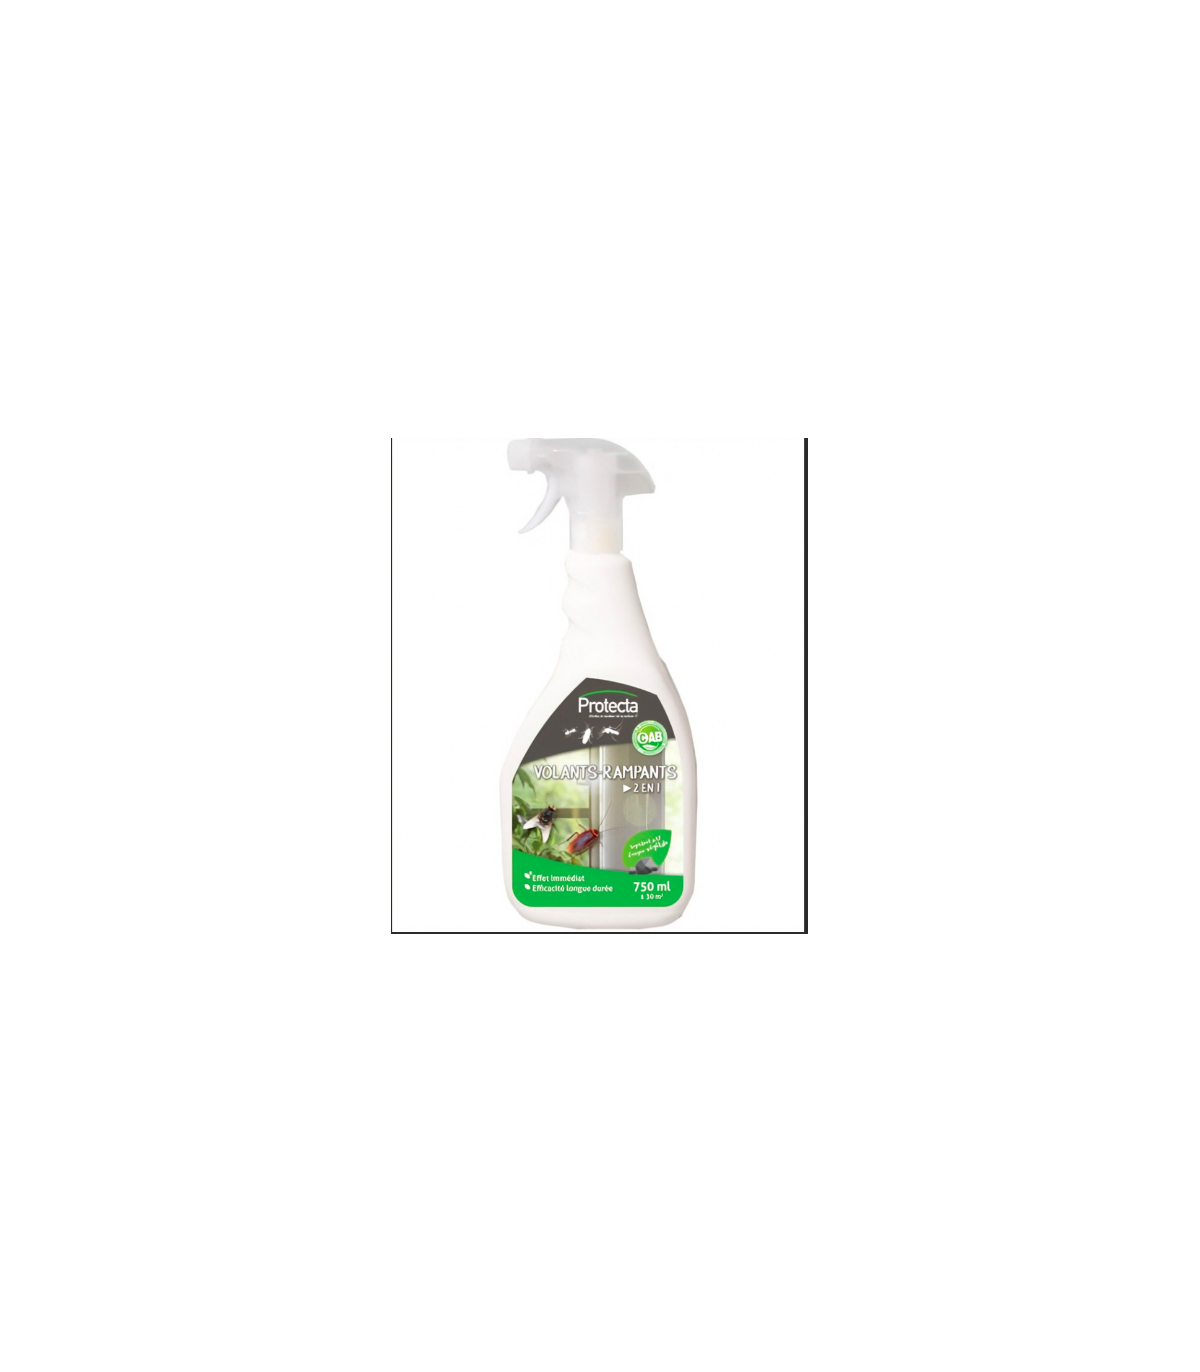 Insecticide anti-volants action immédiate 400ml